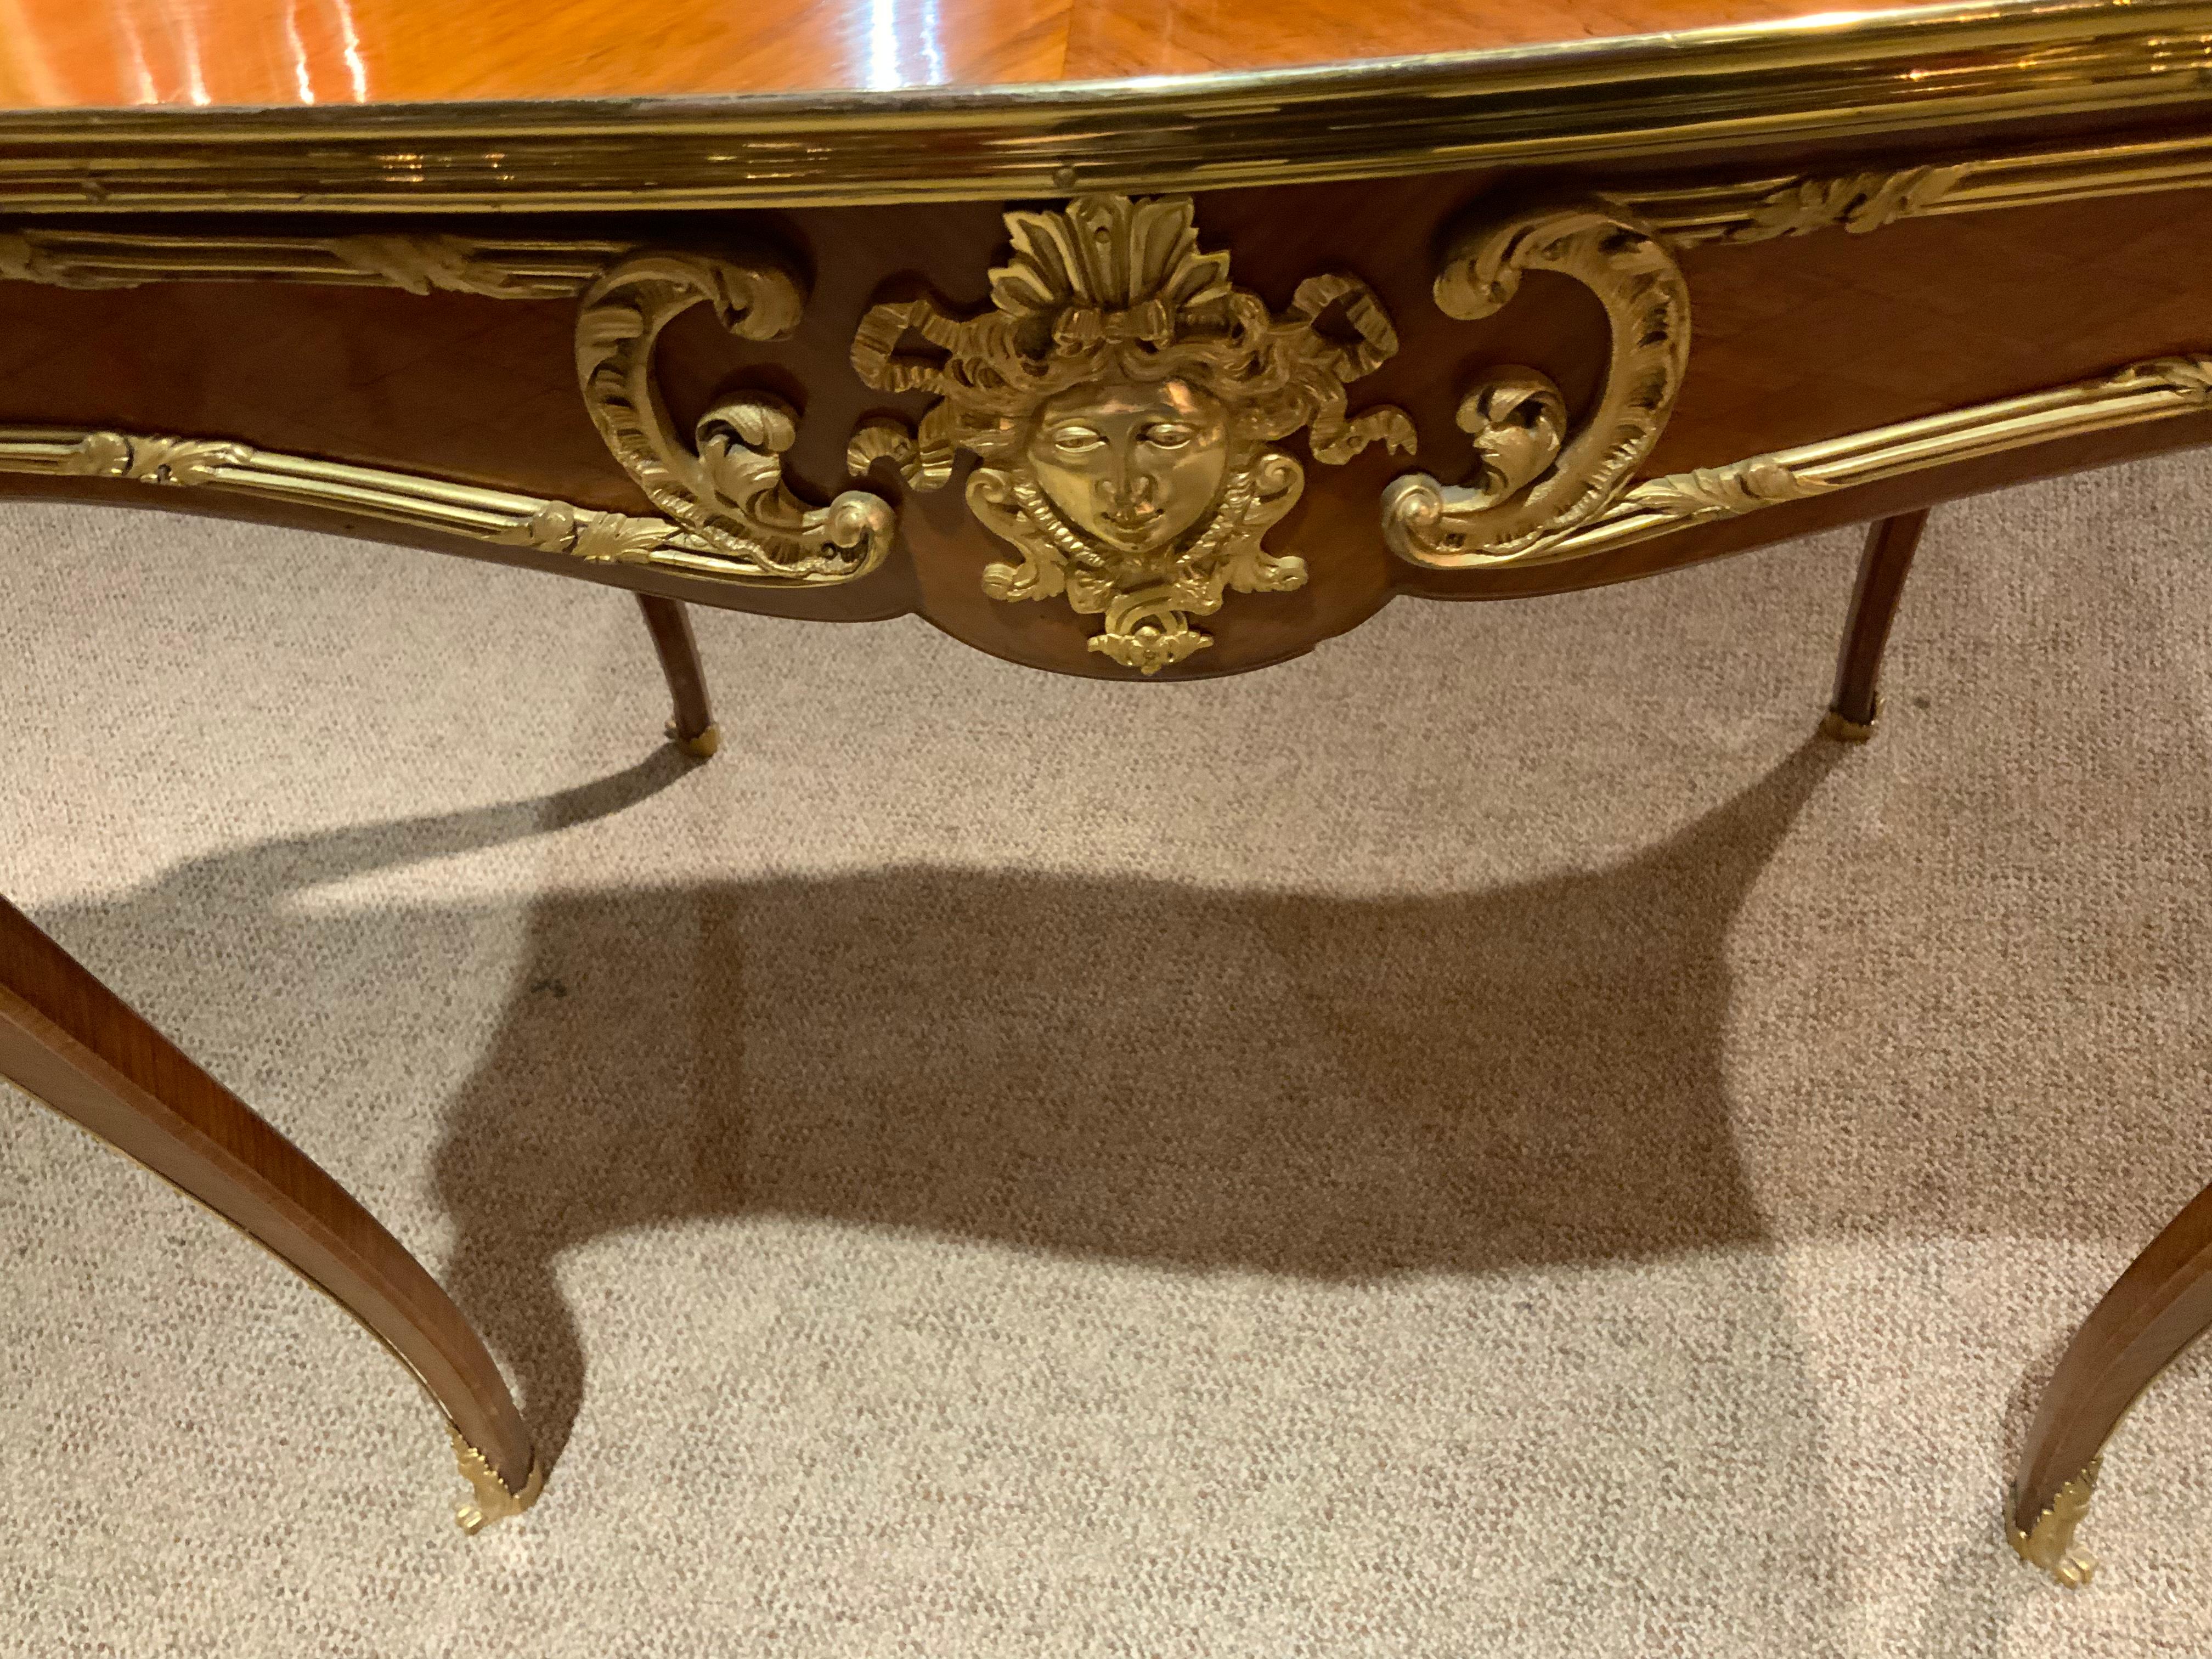 French side table with gilt bronze mounts having a single drawer. Figural mounts on each leg
And a gilt bronze mask on each side.